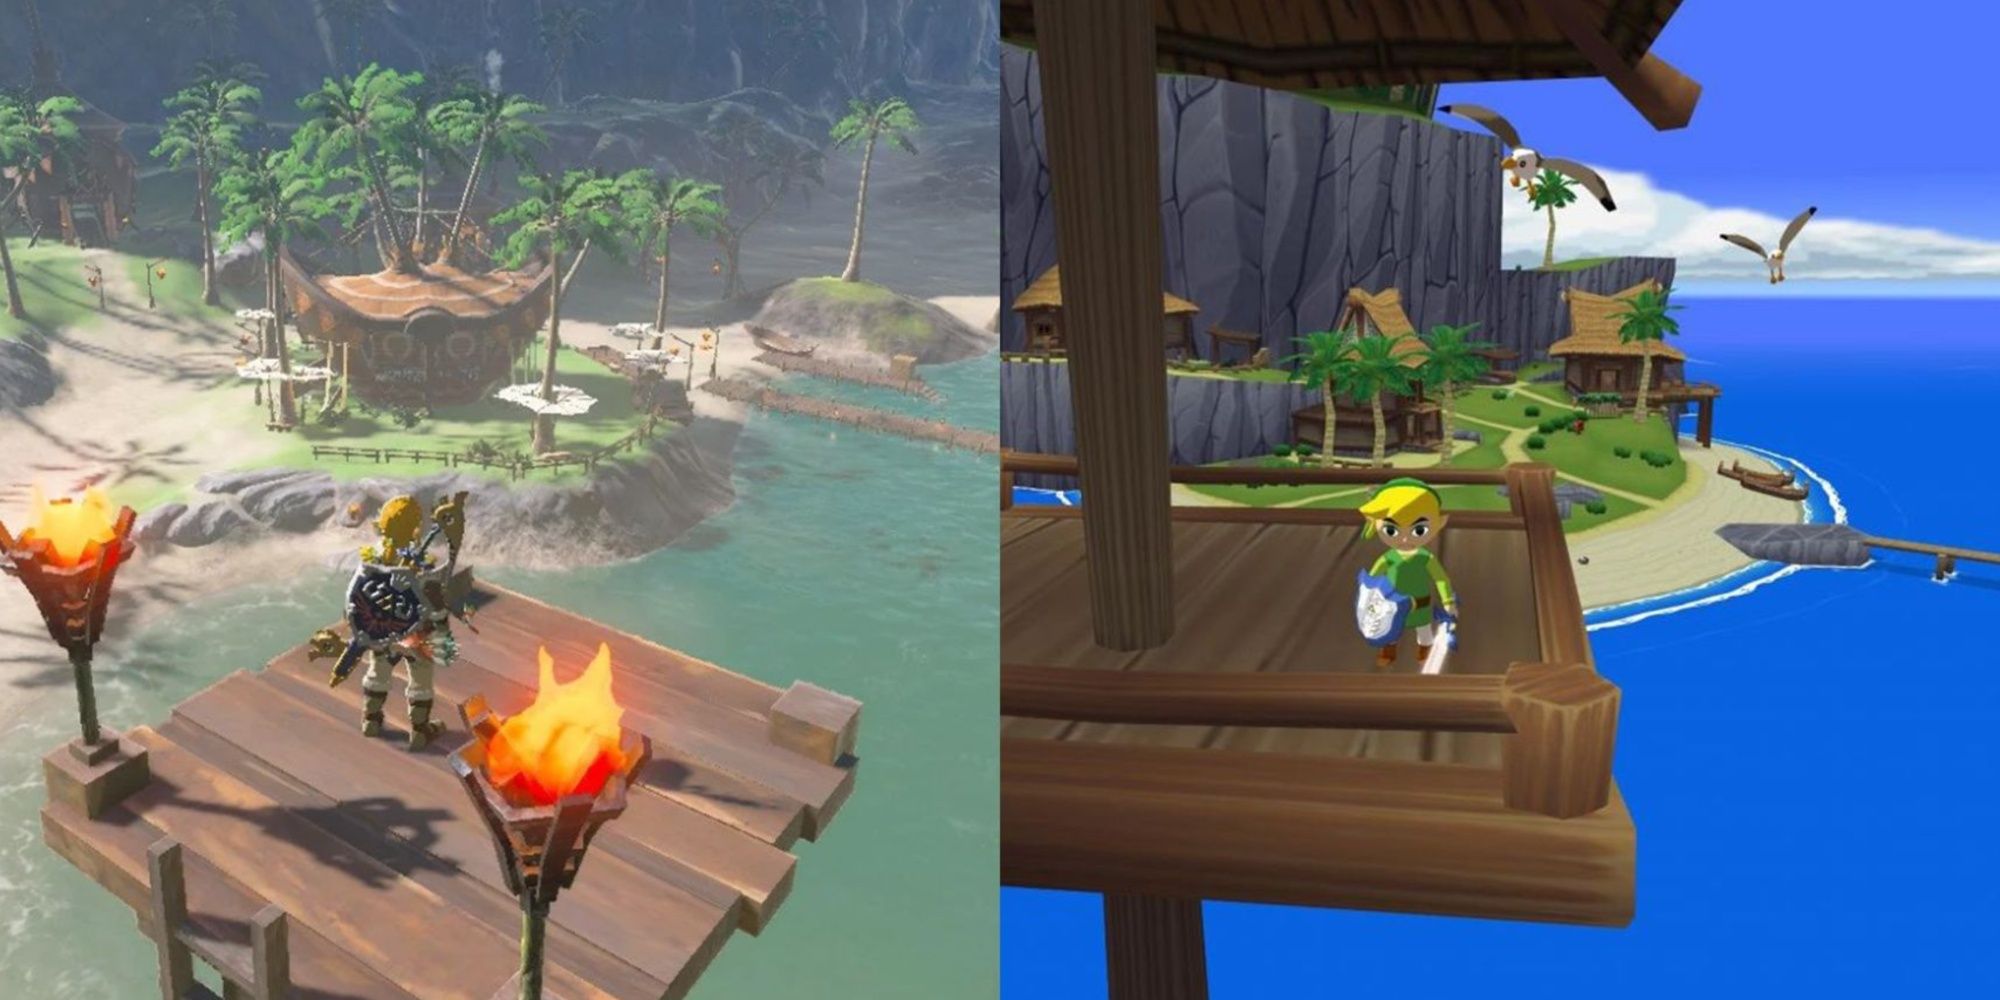 Split image of Lurelin Village in BOTW and Outset Island in The Wind Waker